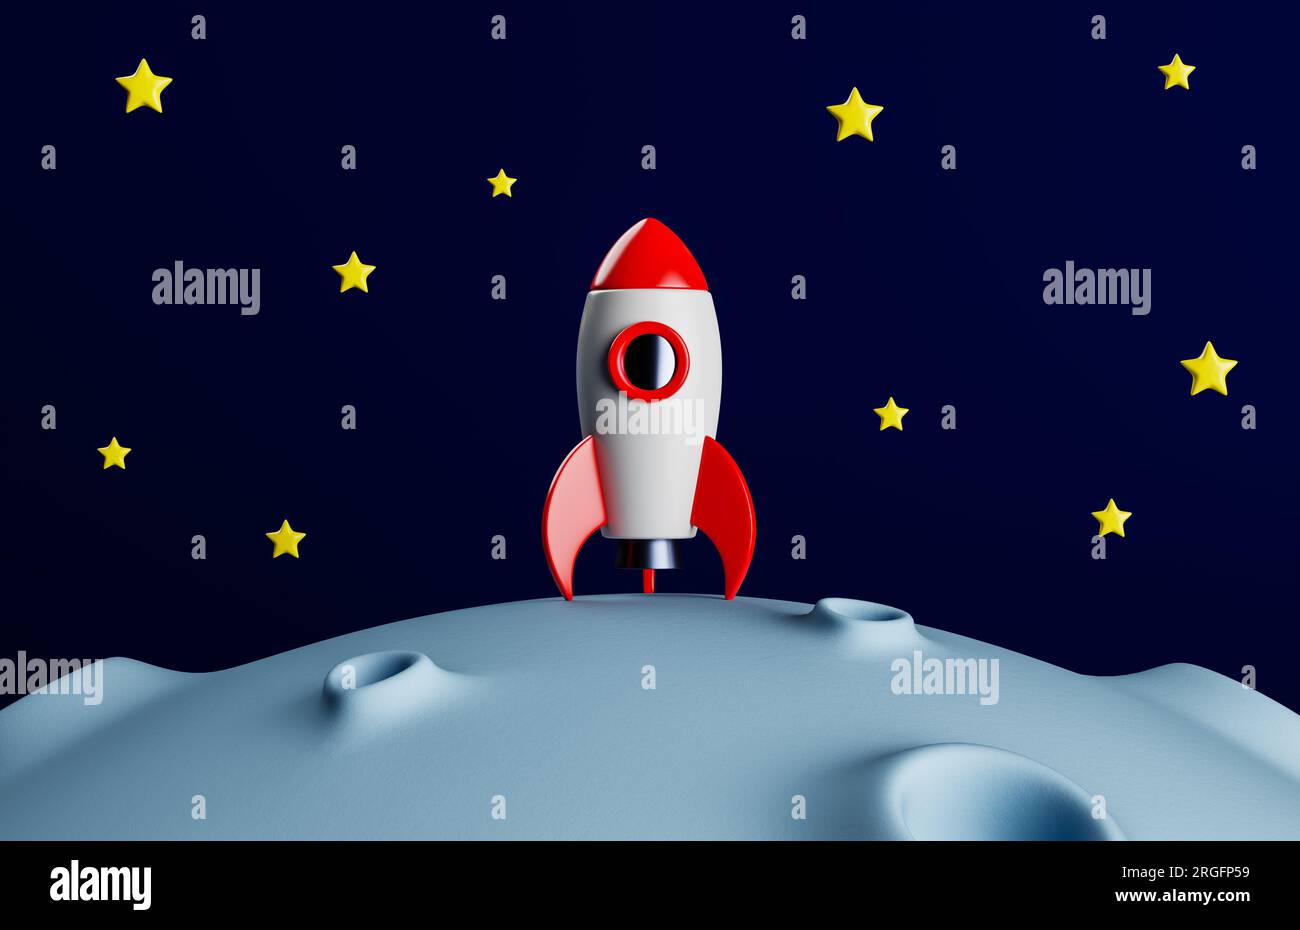 Cartoon style rocket standing on a surface of a planet. 3d rendering of a small spacecraft at its destination Stock Photo